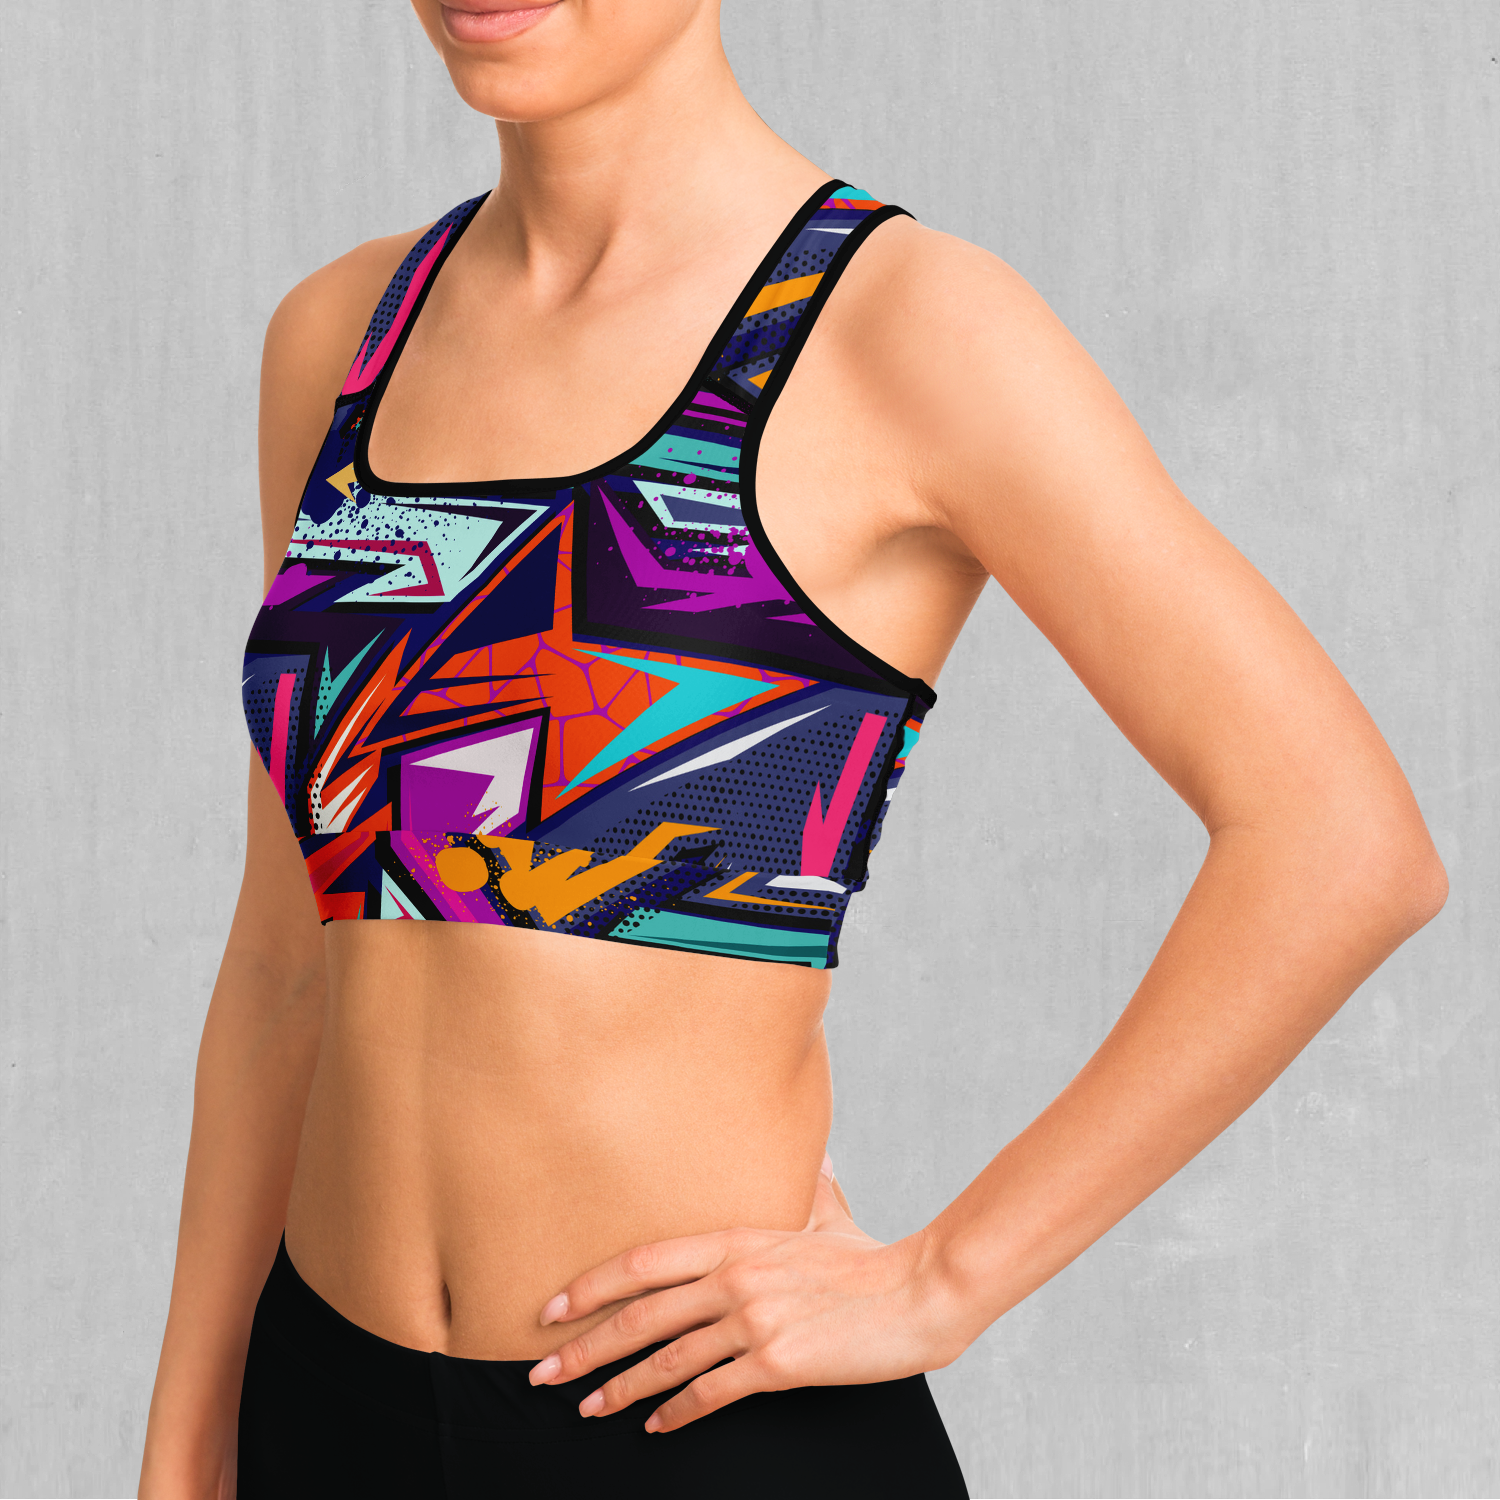 Sports Bras in Sizes S to 3XL, Quirky Printed Sports Bras